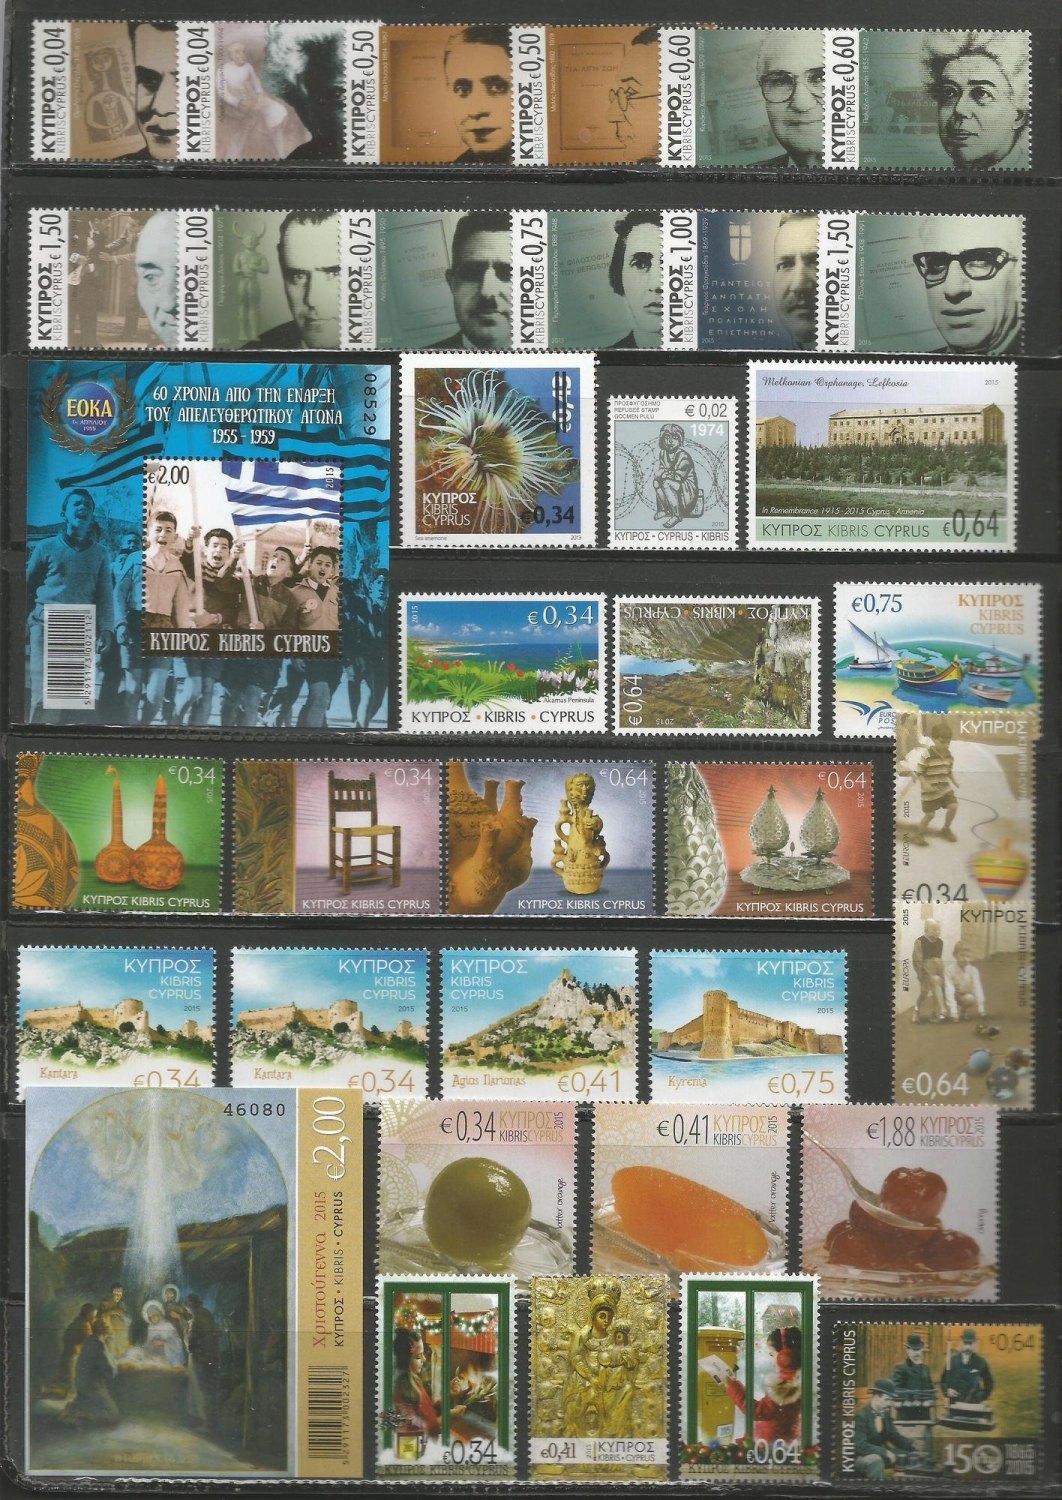 Cyprus Stamps 2015 Complete Year Set - (Booklet not included) MINT